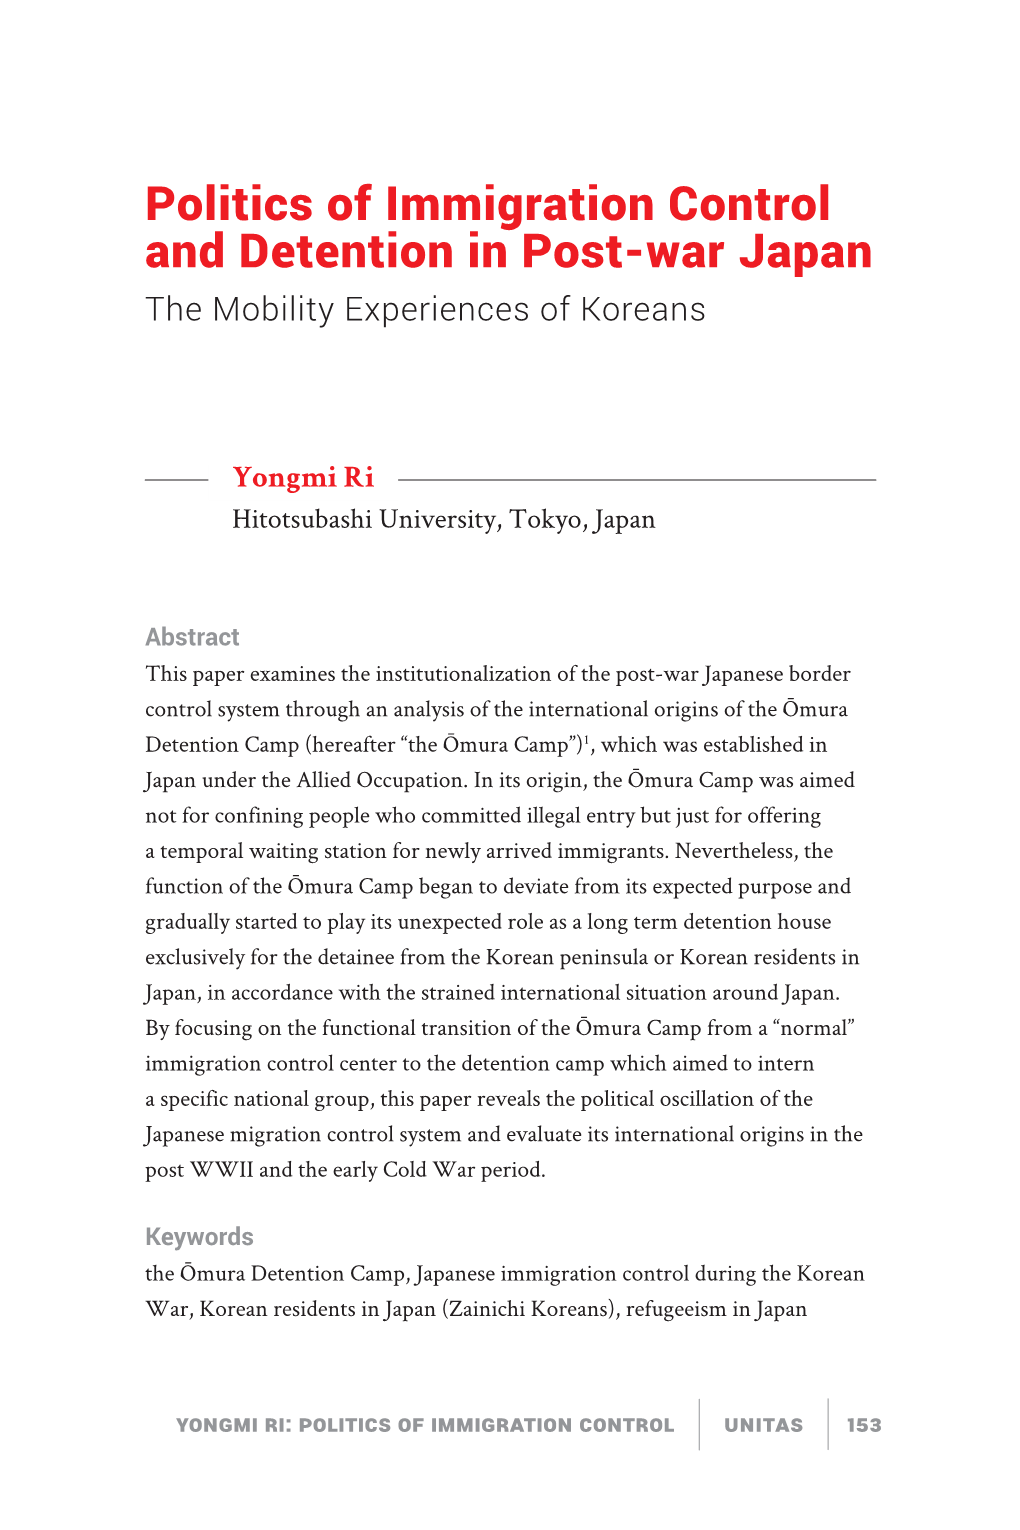 Politics of Immigration Control and Detention in Post-War Japan the Mobility Experiences of Koreans